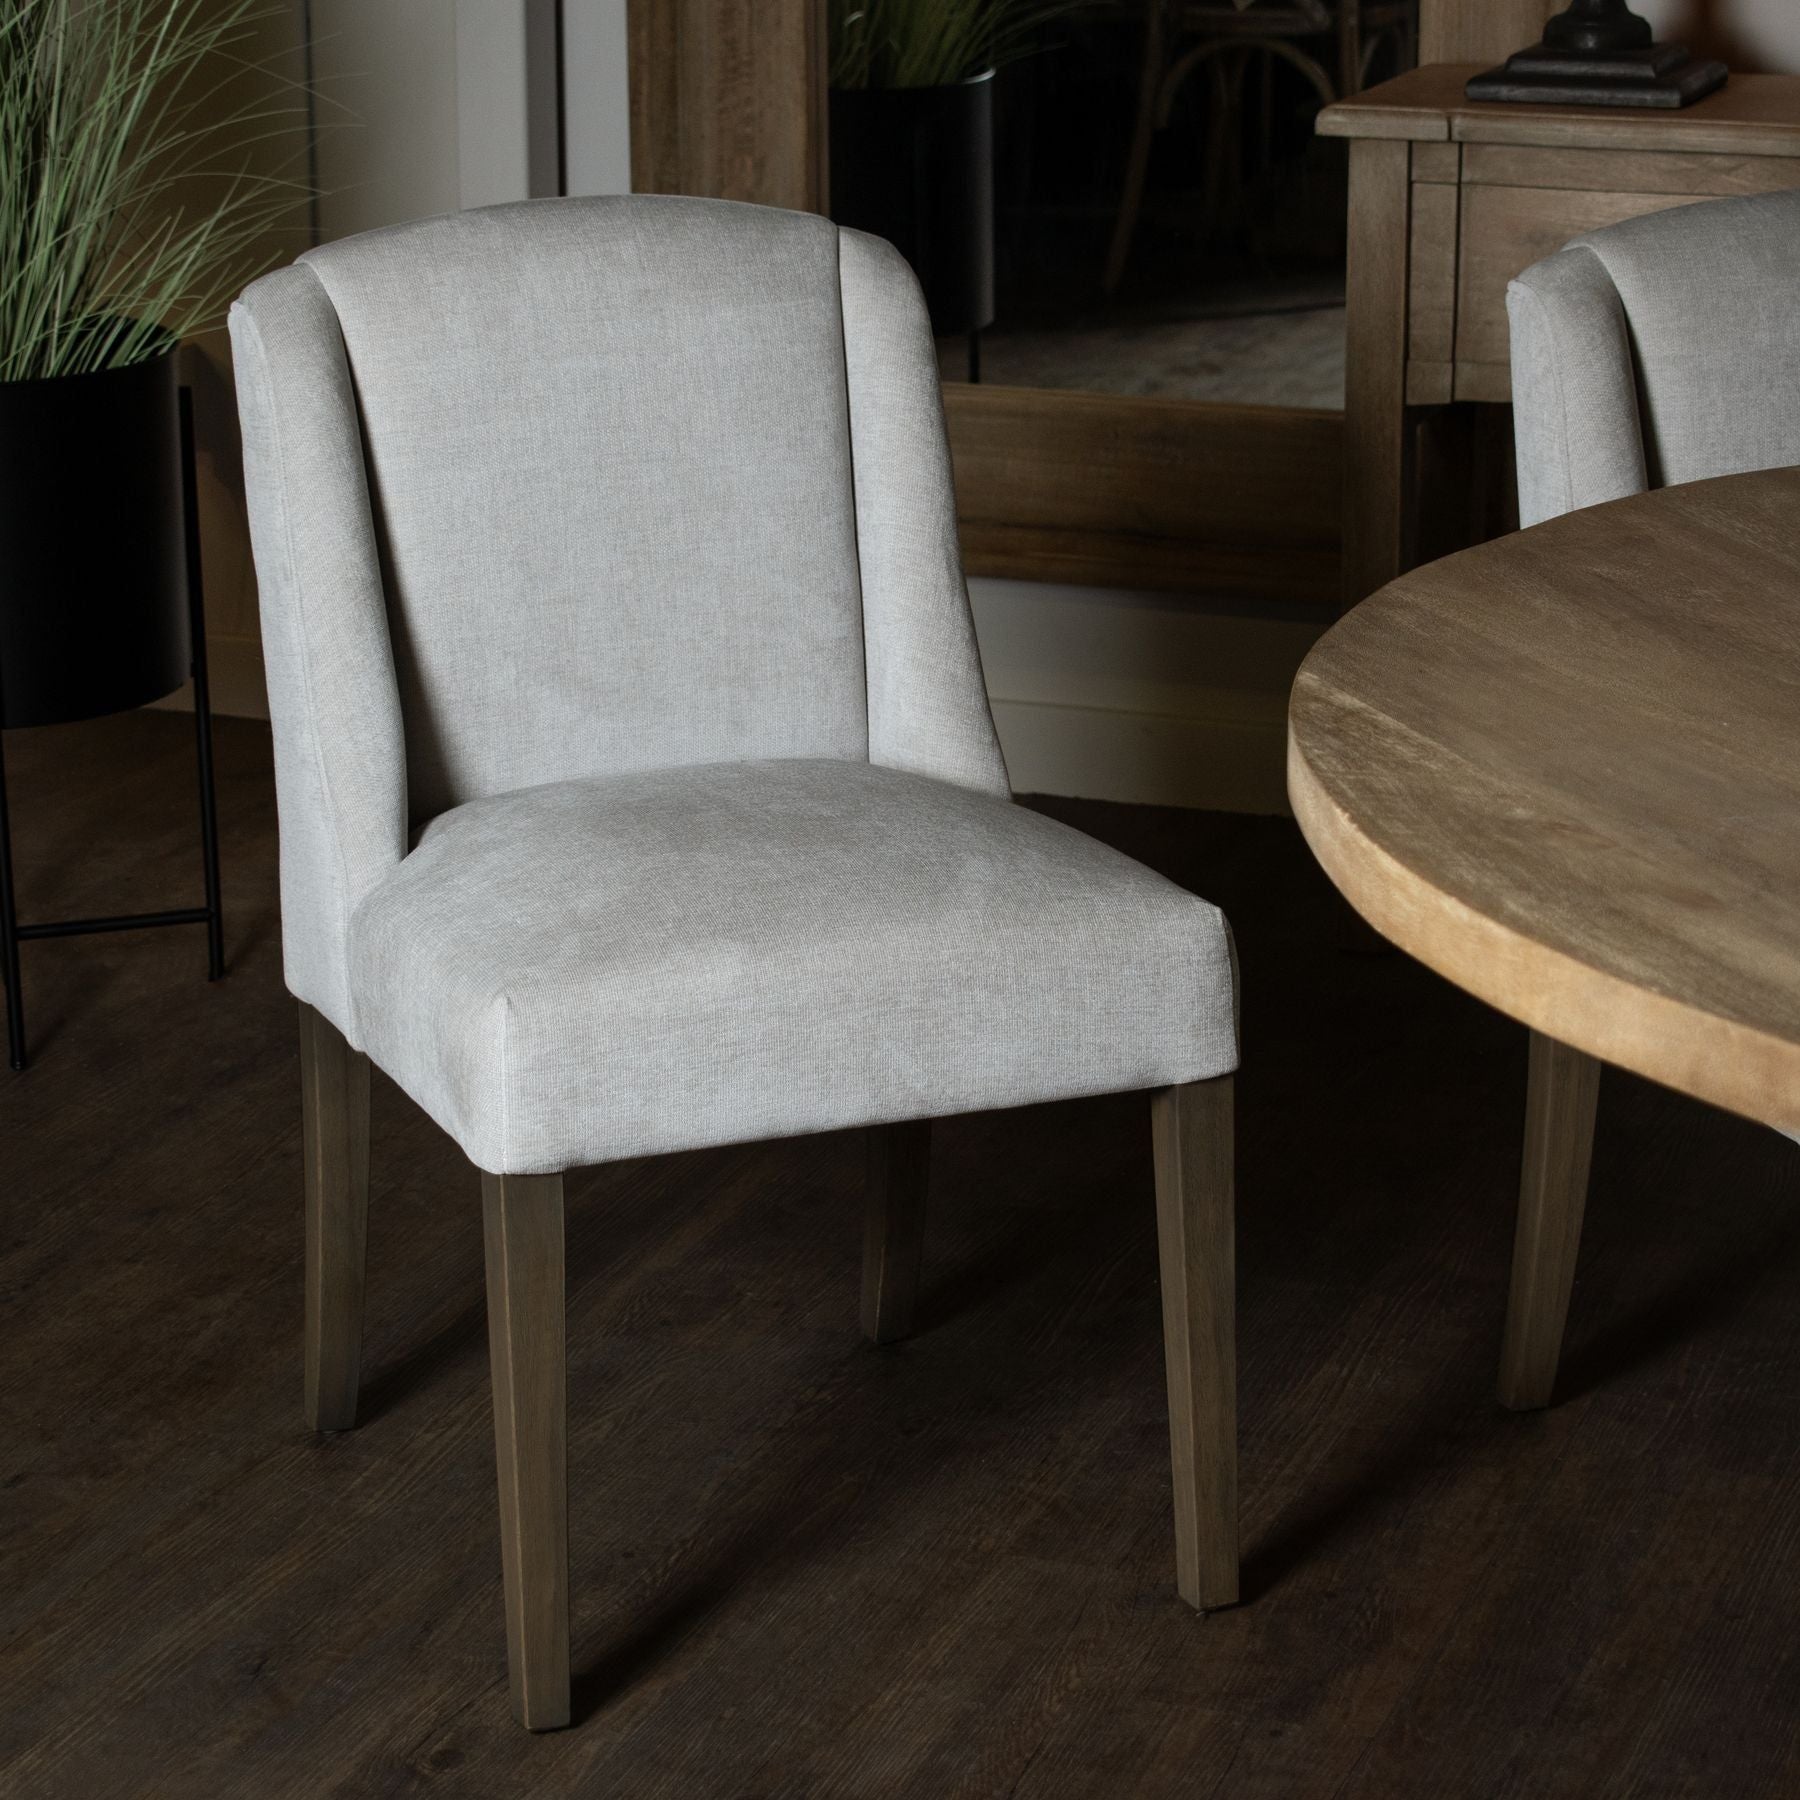 Compton Grey Dining Chair - Ashton and Finch